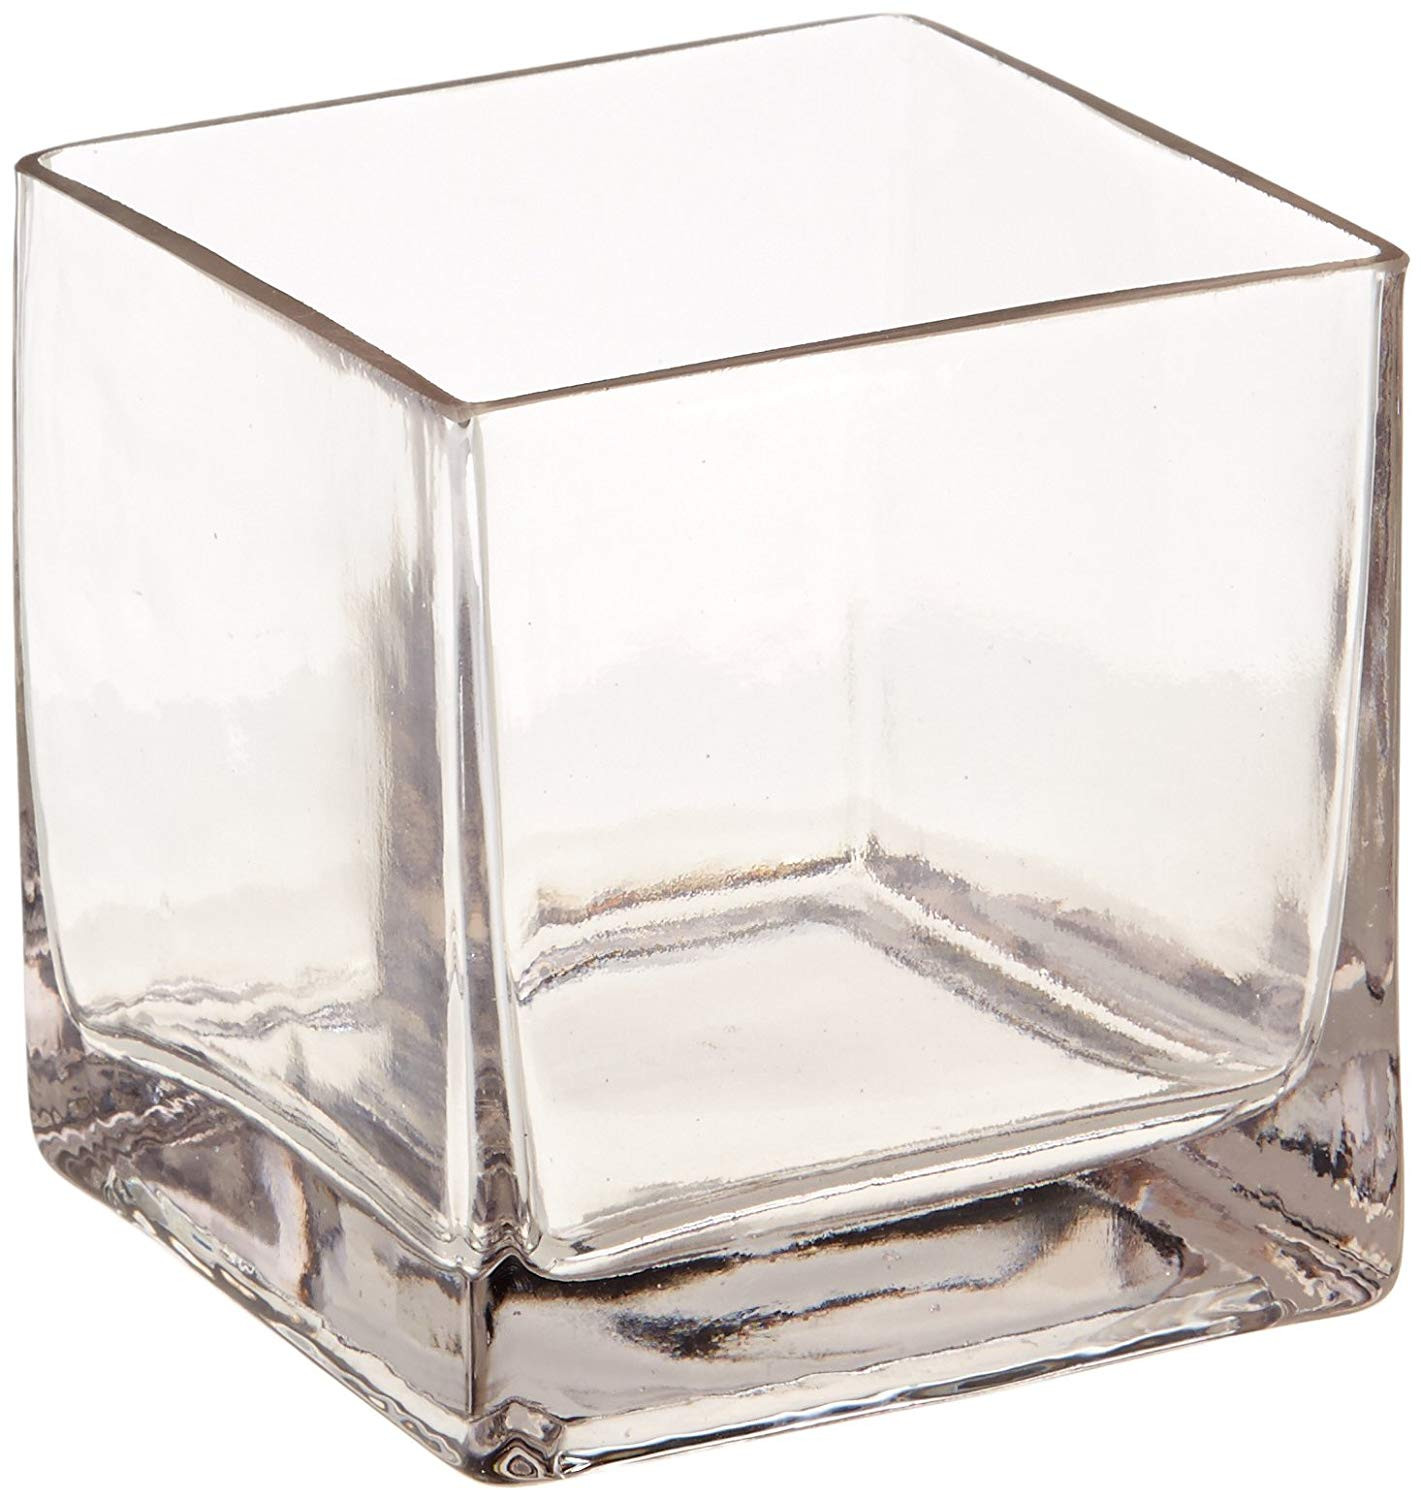 17 Unique Clear Square Vases Centerpieces 2024 free download clear square vases centerpieces of amazon com 12piece 4 square crystal clear glass vase home kitchen within 71 jezfmvnl sl1500